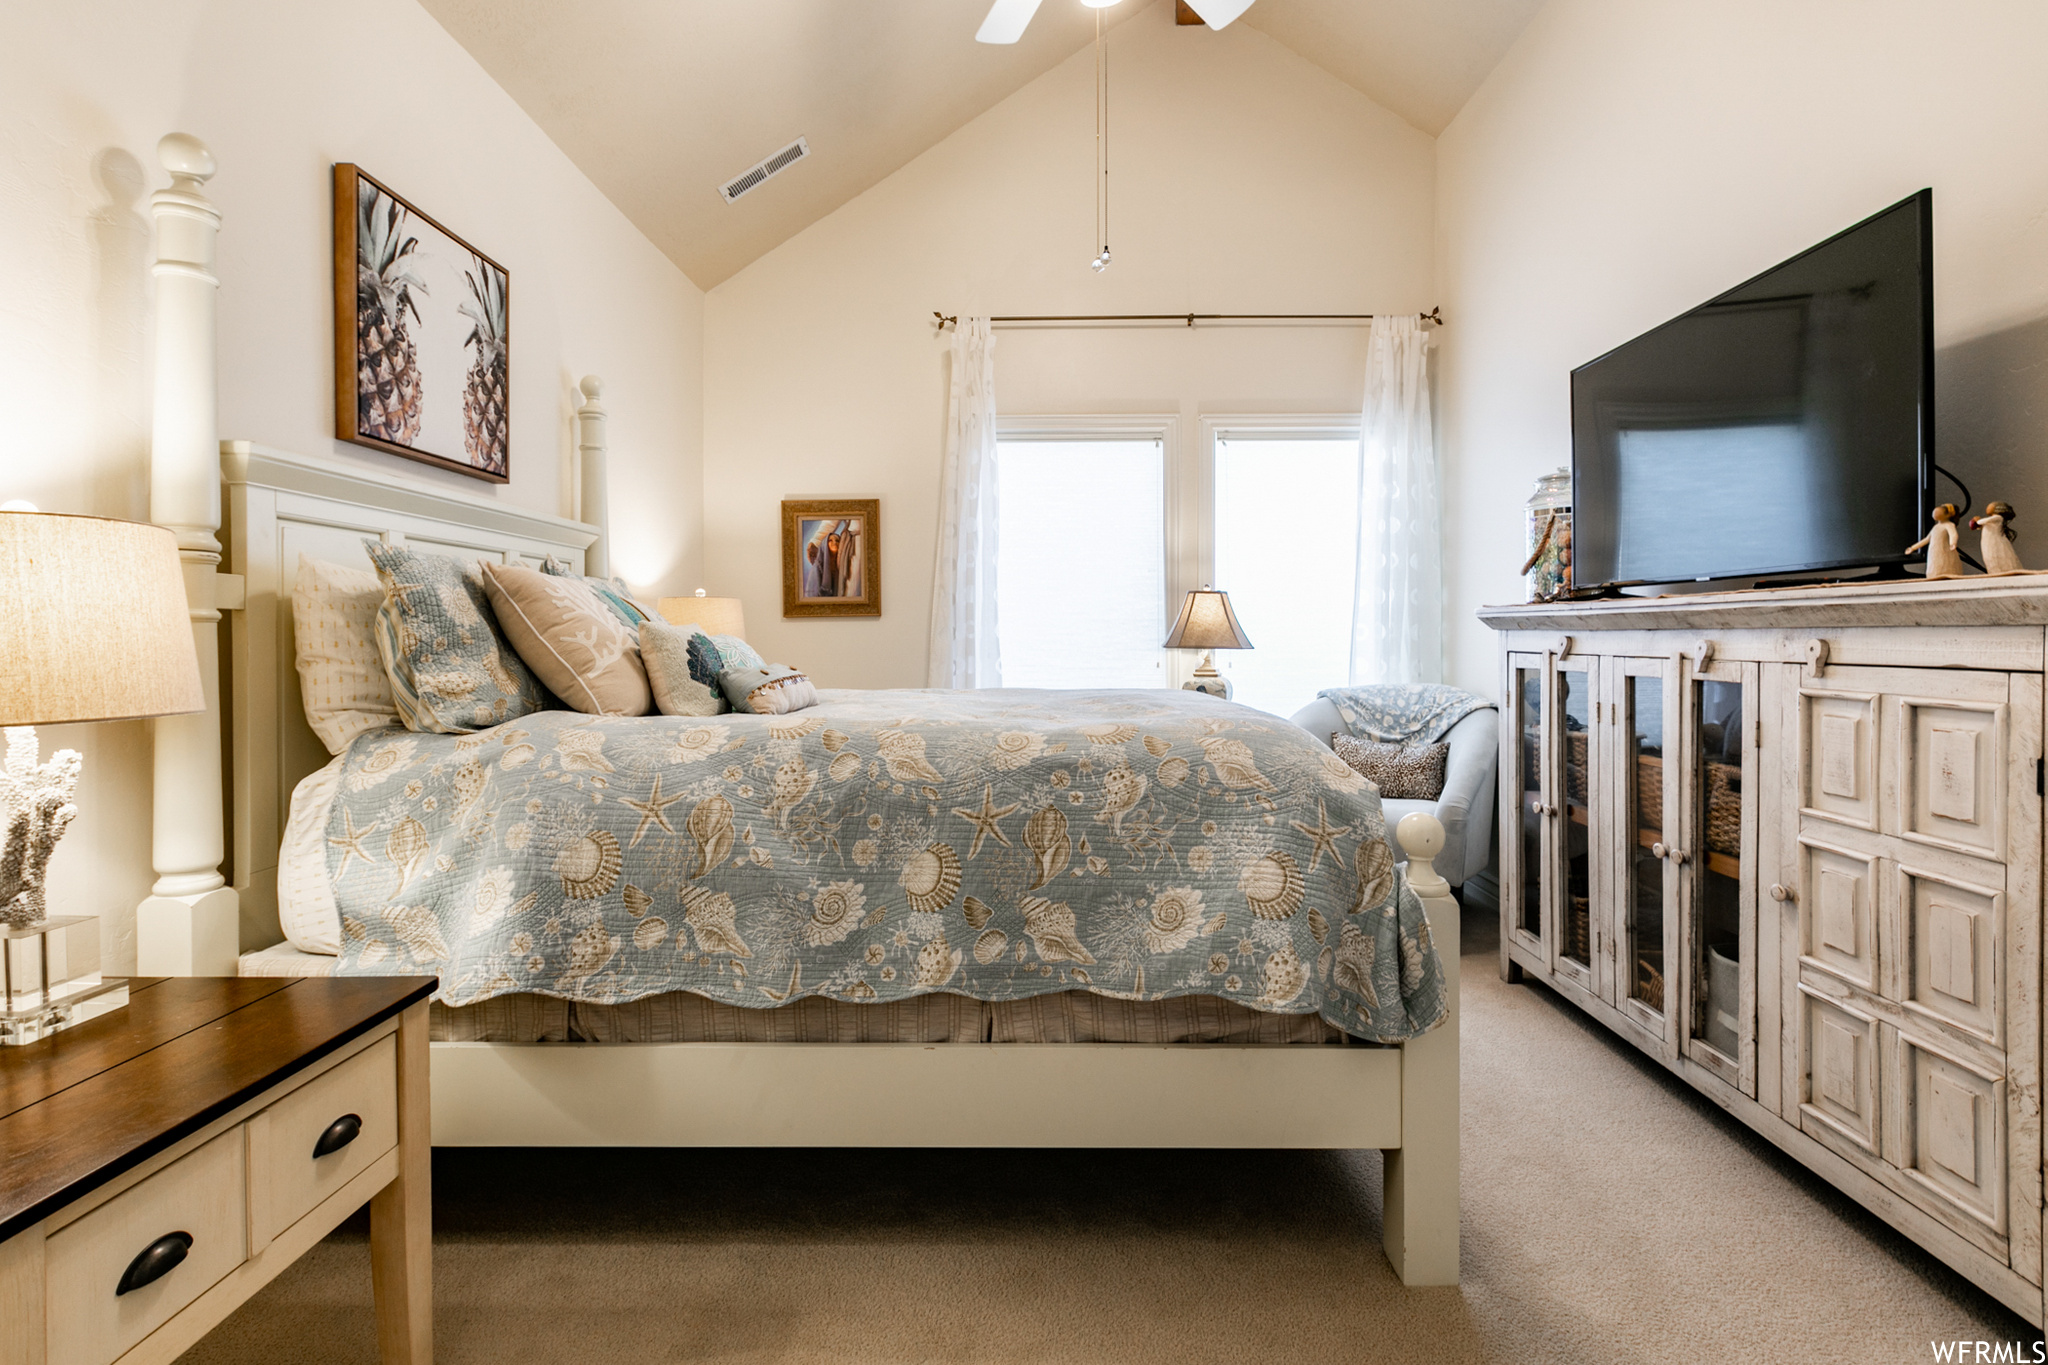 High ceilings, a ceiling fan and a large walk-in closet complete this sunny bedroom.